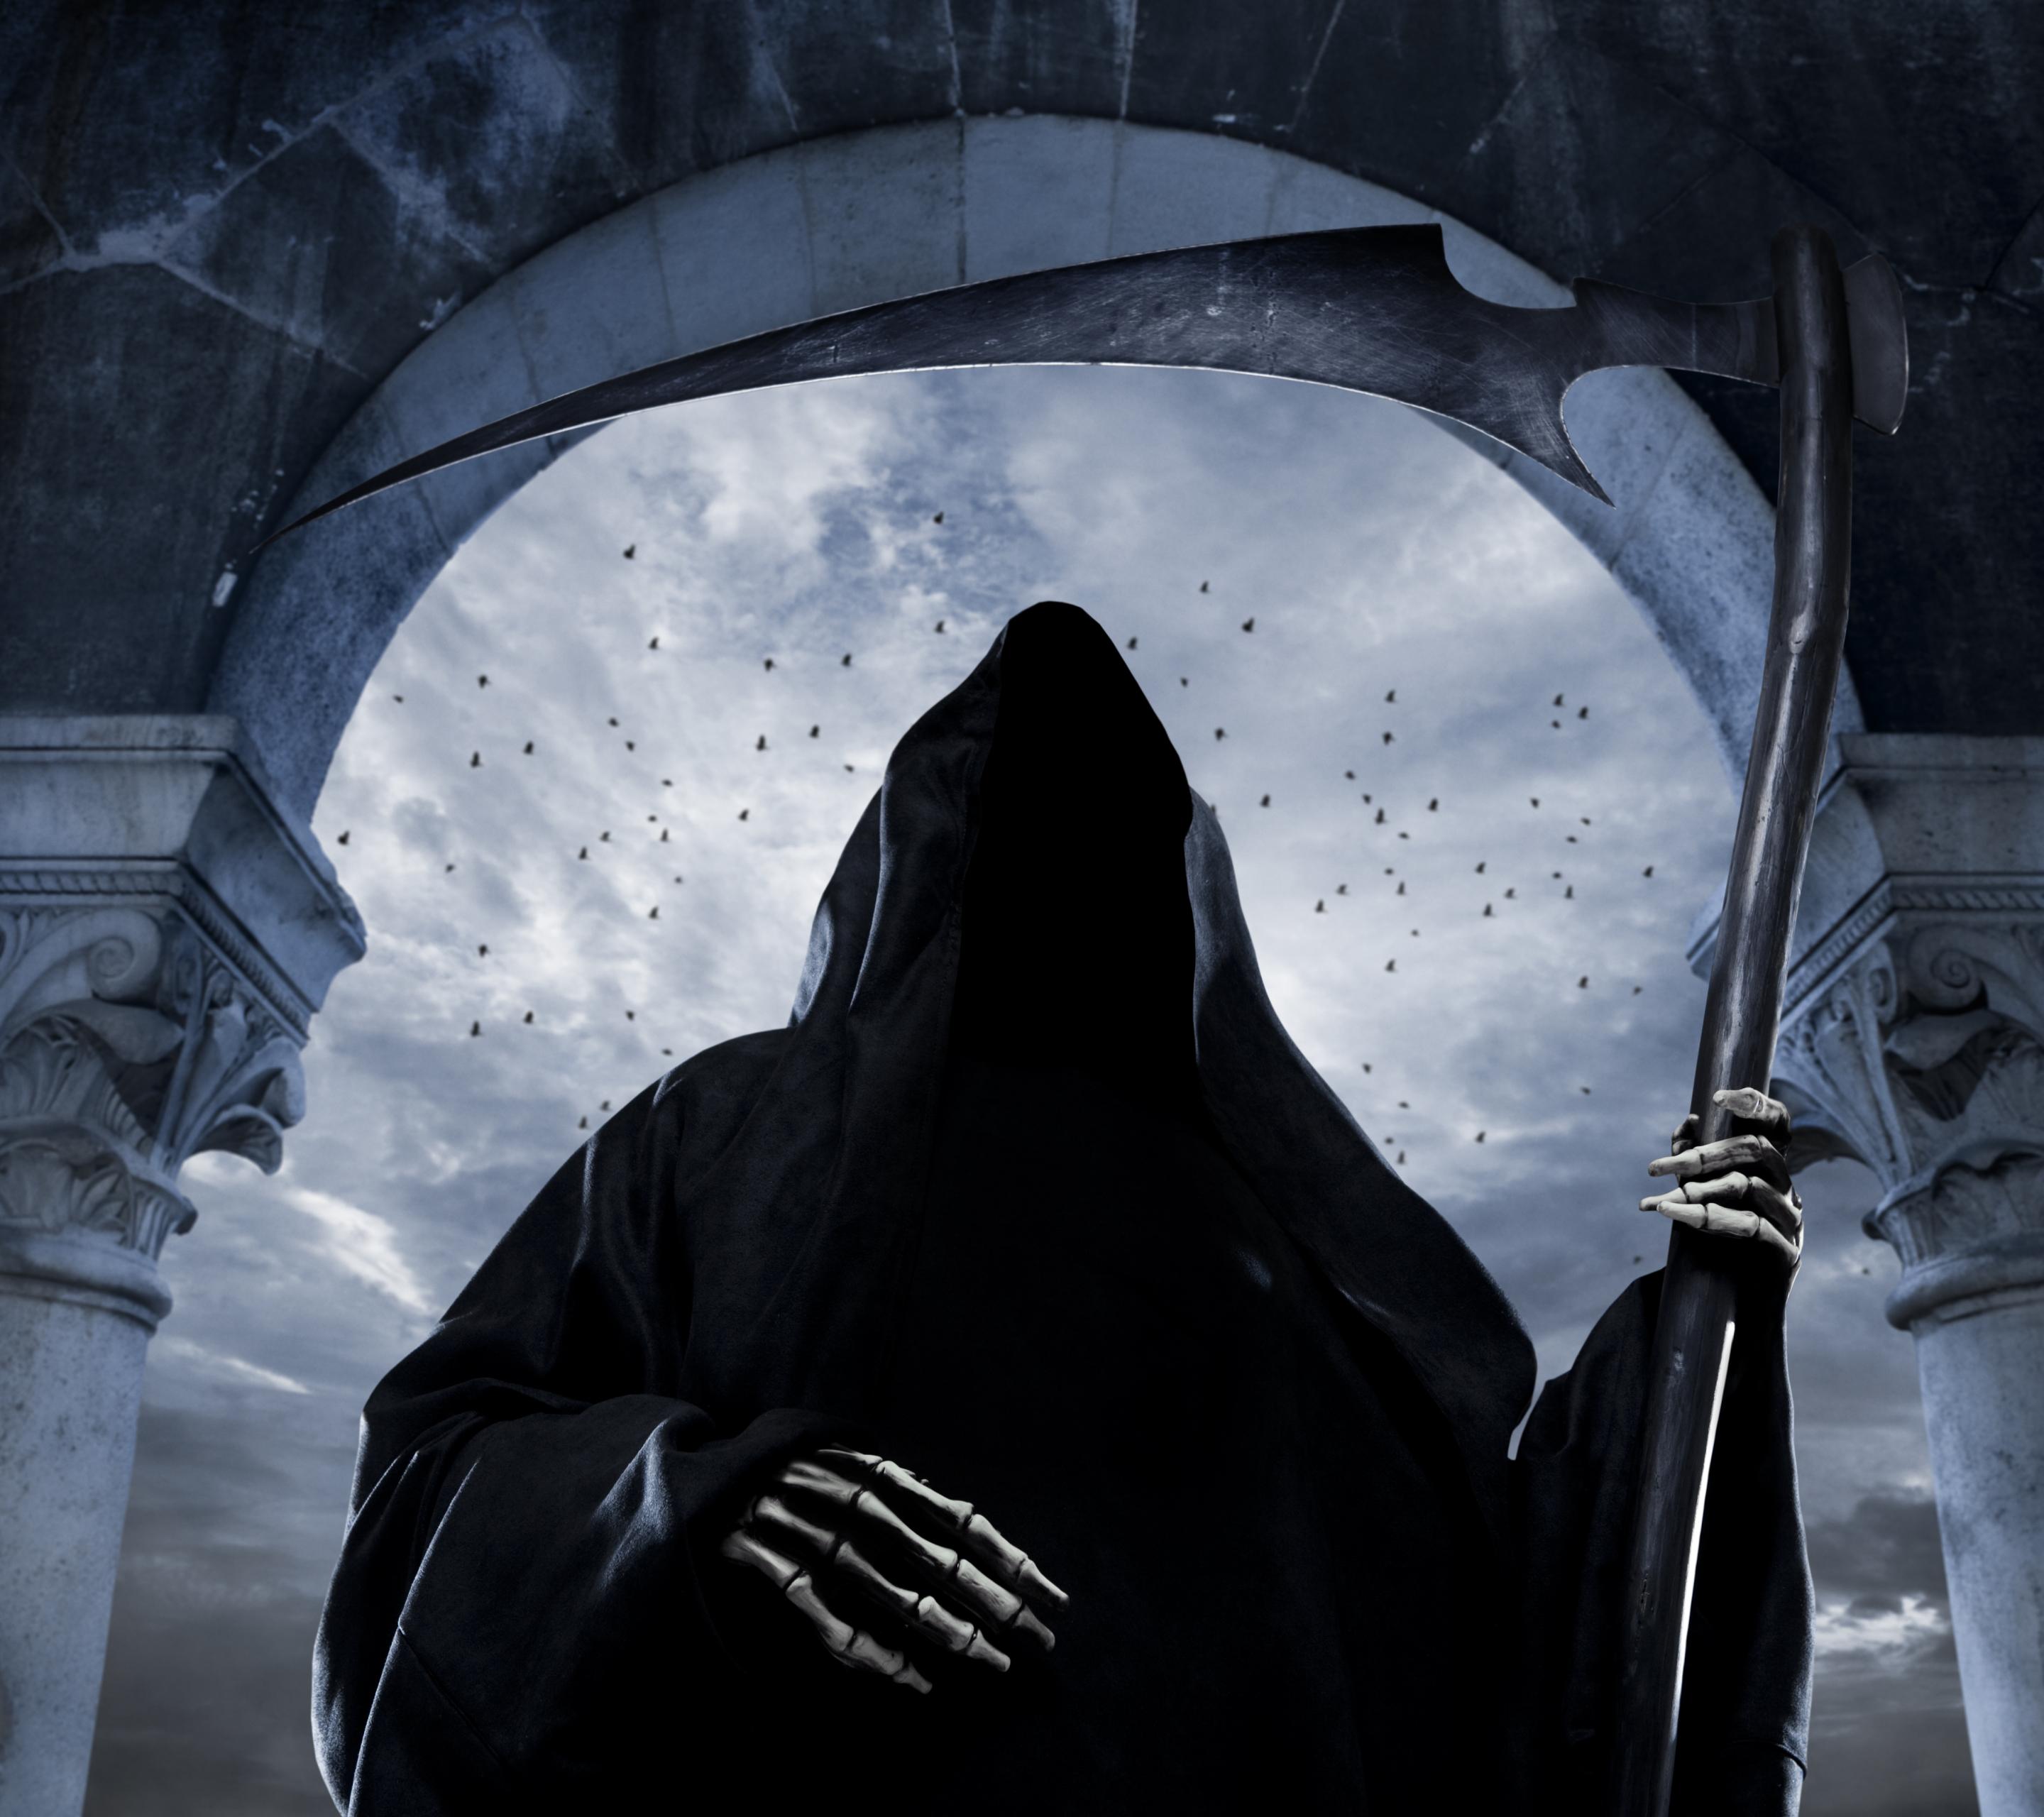 Download Grim Reaper wallpapers for mobile phone free Grim Reaper HD  pictures